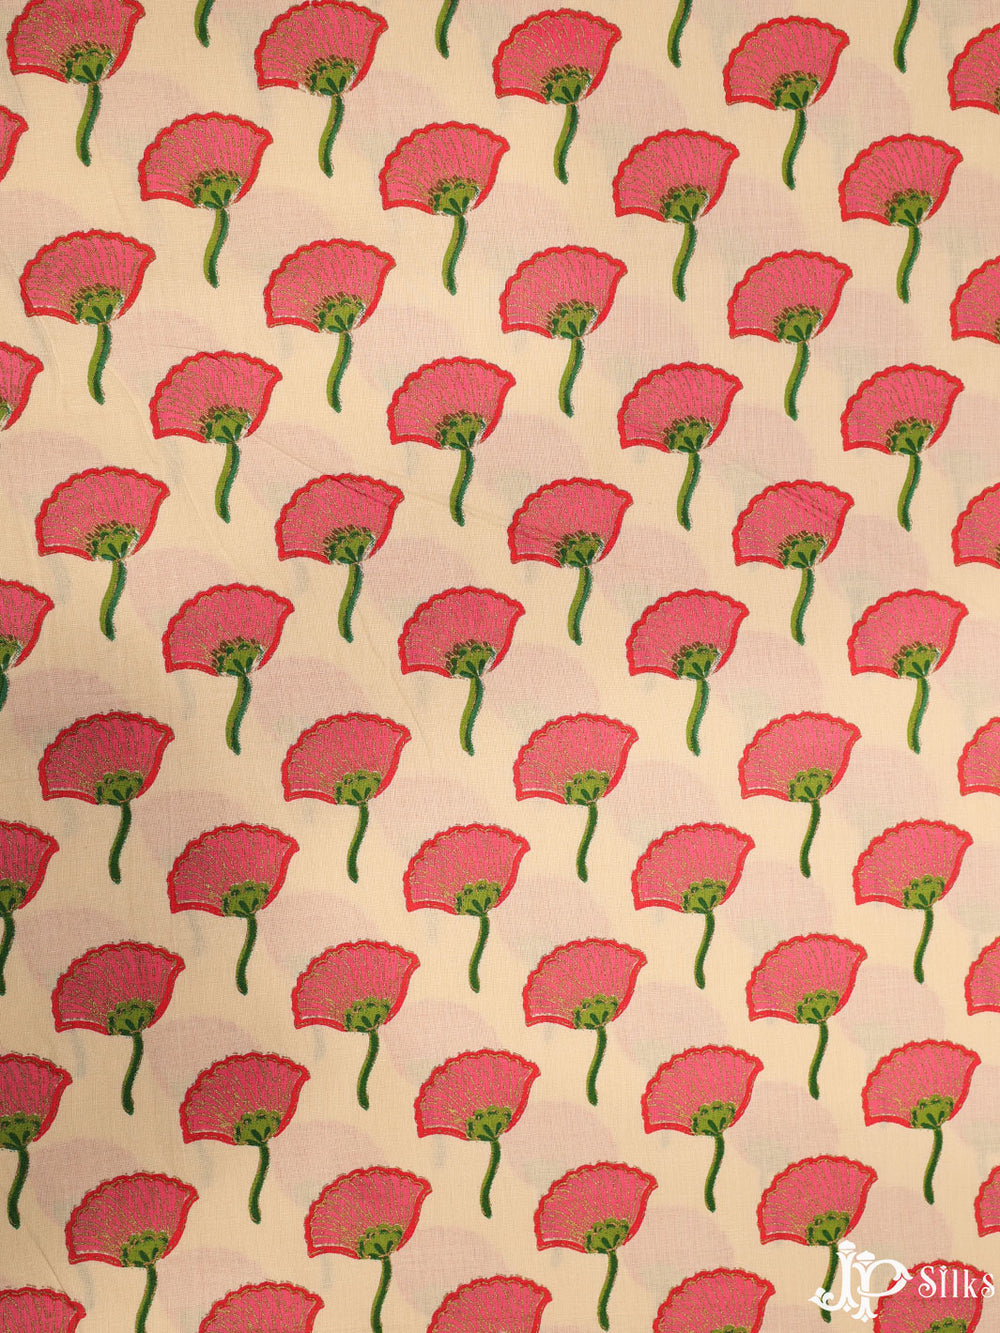 Beige and Pink Cotton Fabric - A7910 - View 1